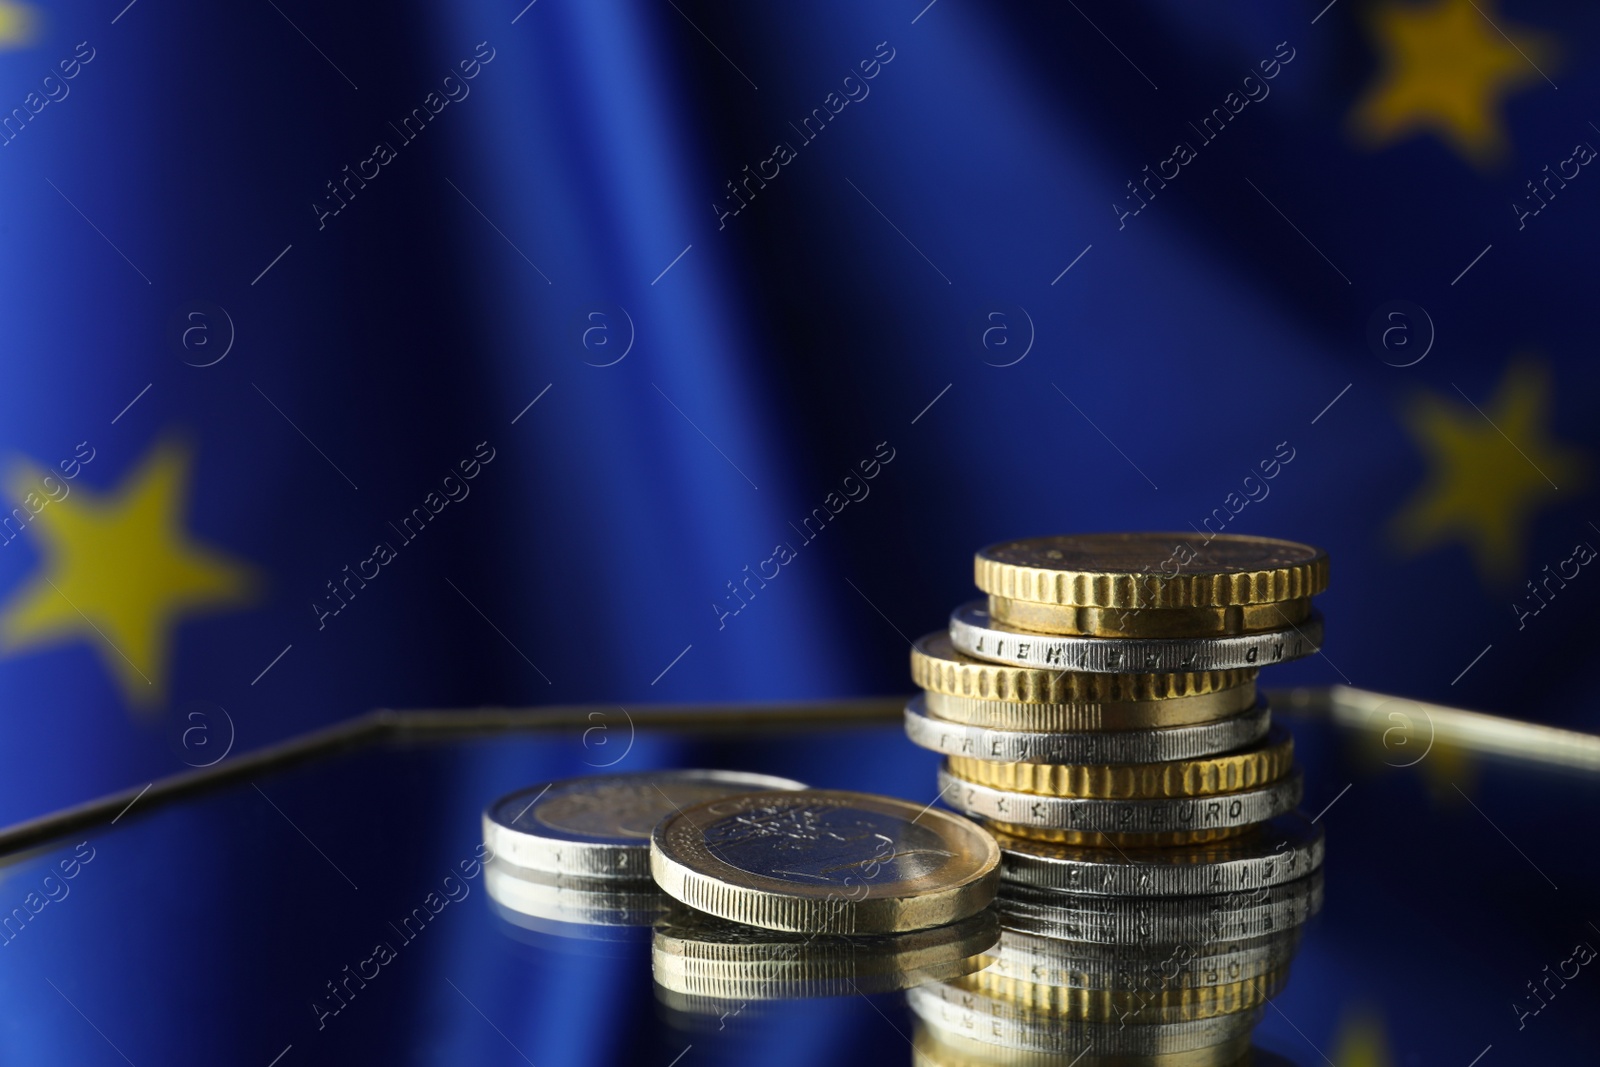 Photo of Coins on table against European Union flag, space for text